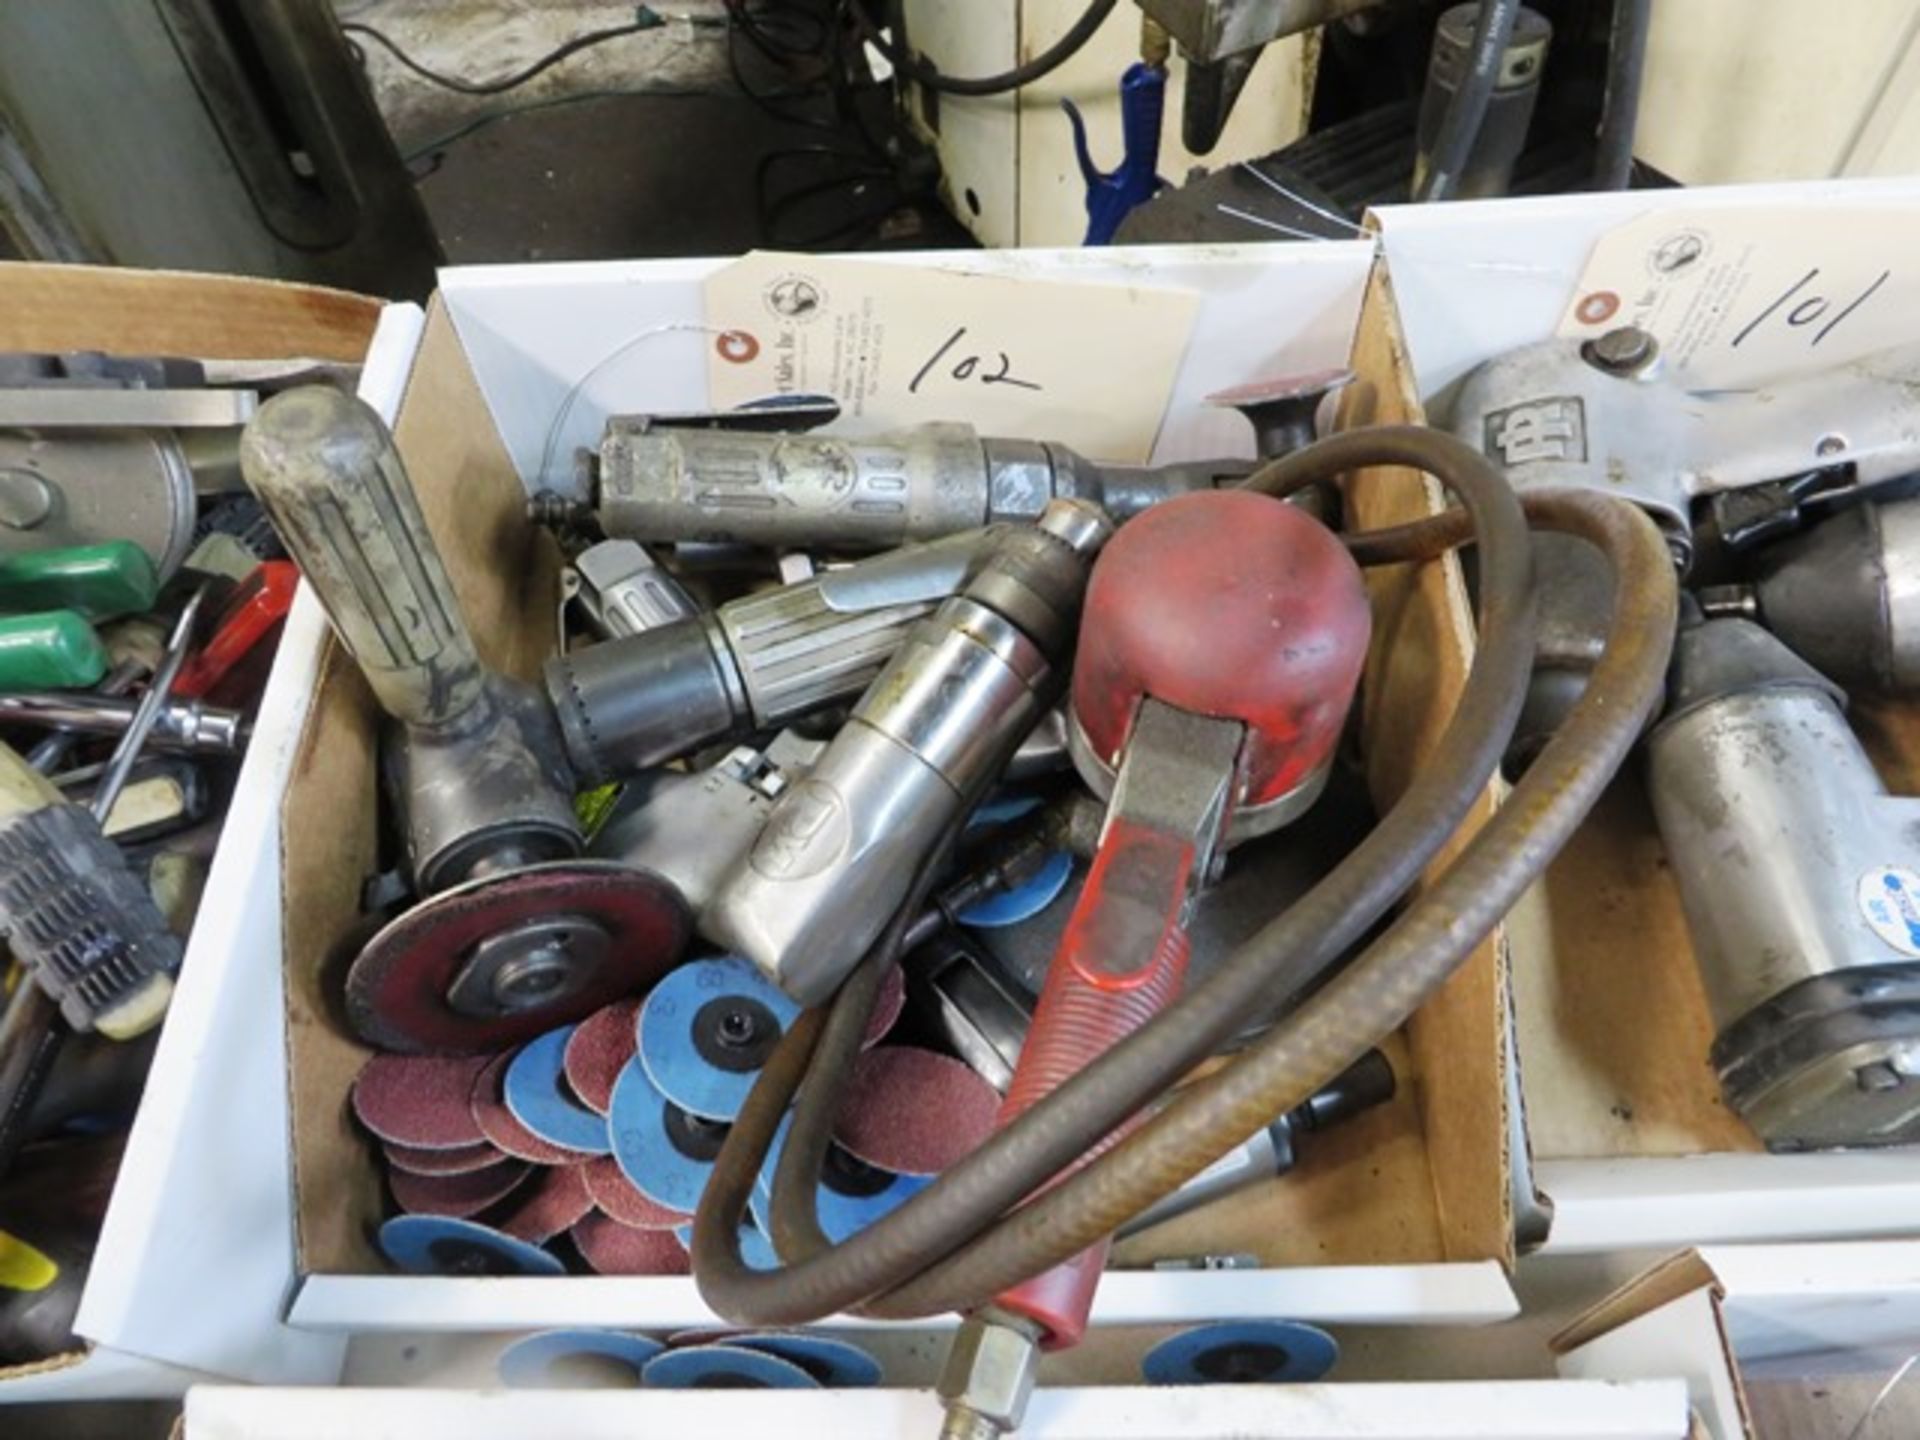 Assorted Pneumatic Grinders, Ratchets & Drills